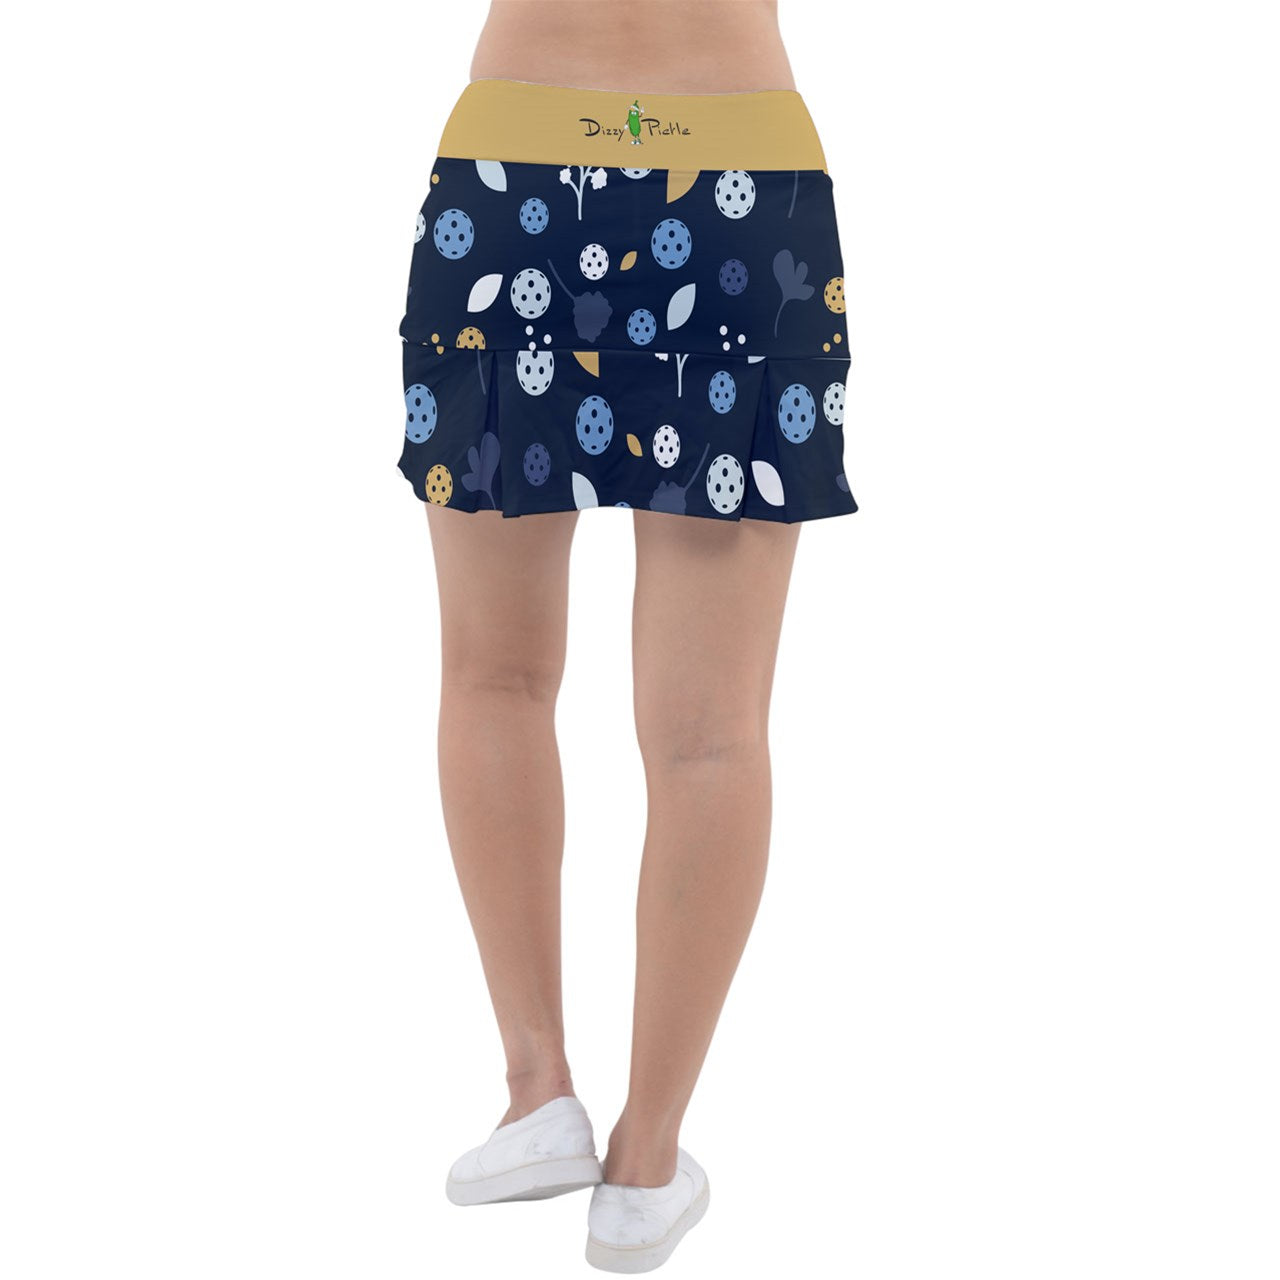 Dizzy Pickle Lesley Women's Pickleball Classic Pleated Skort Coordinating Patterned Inner Shorts Pockets Navy Blue